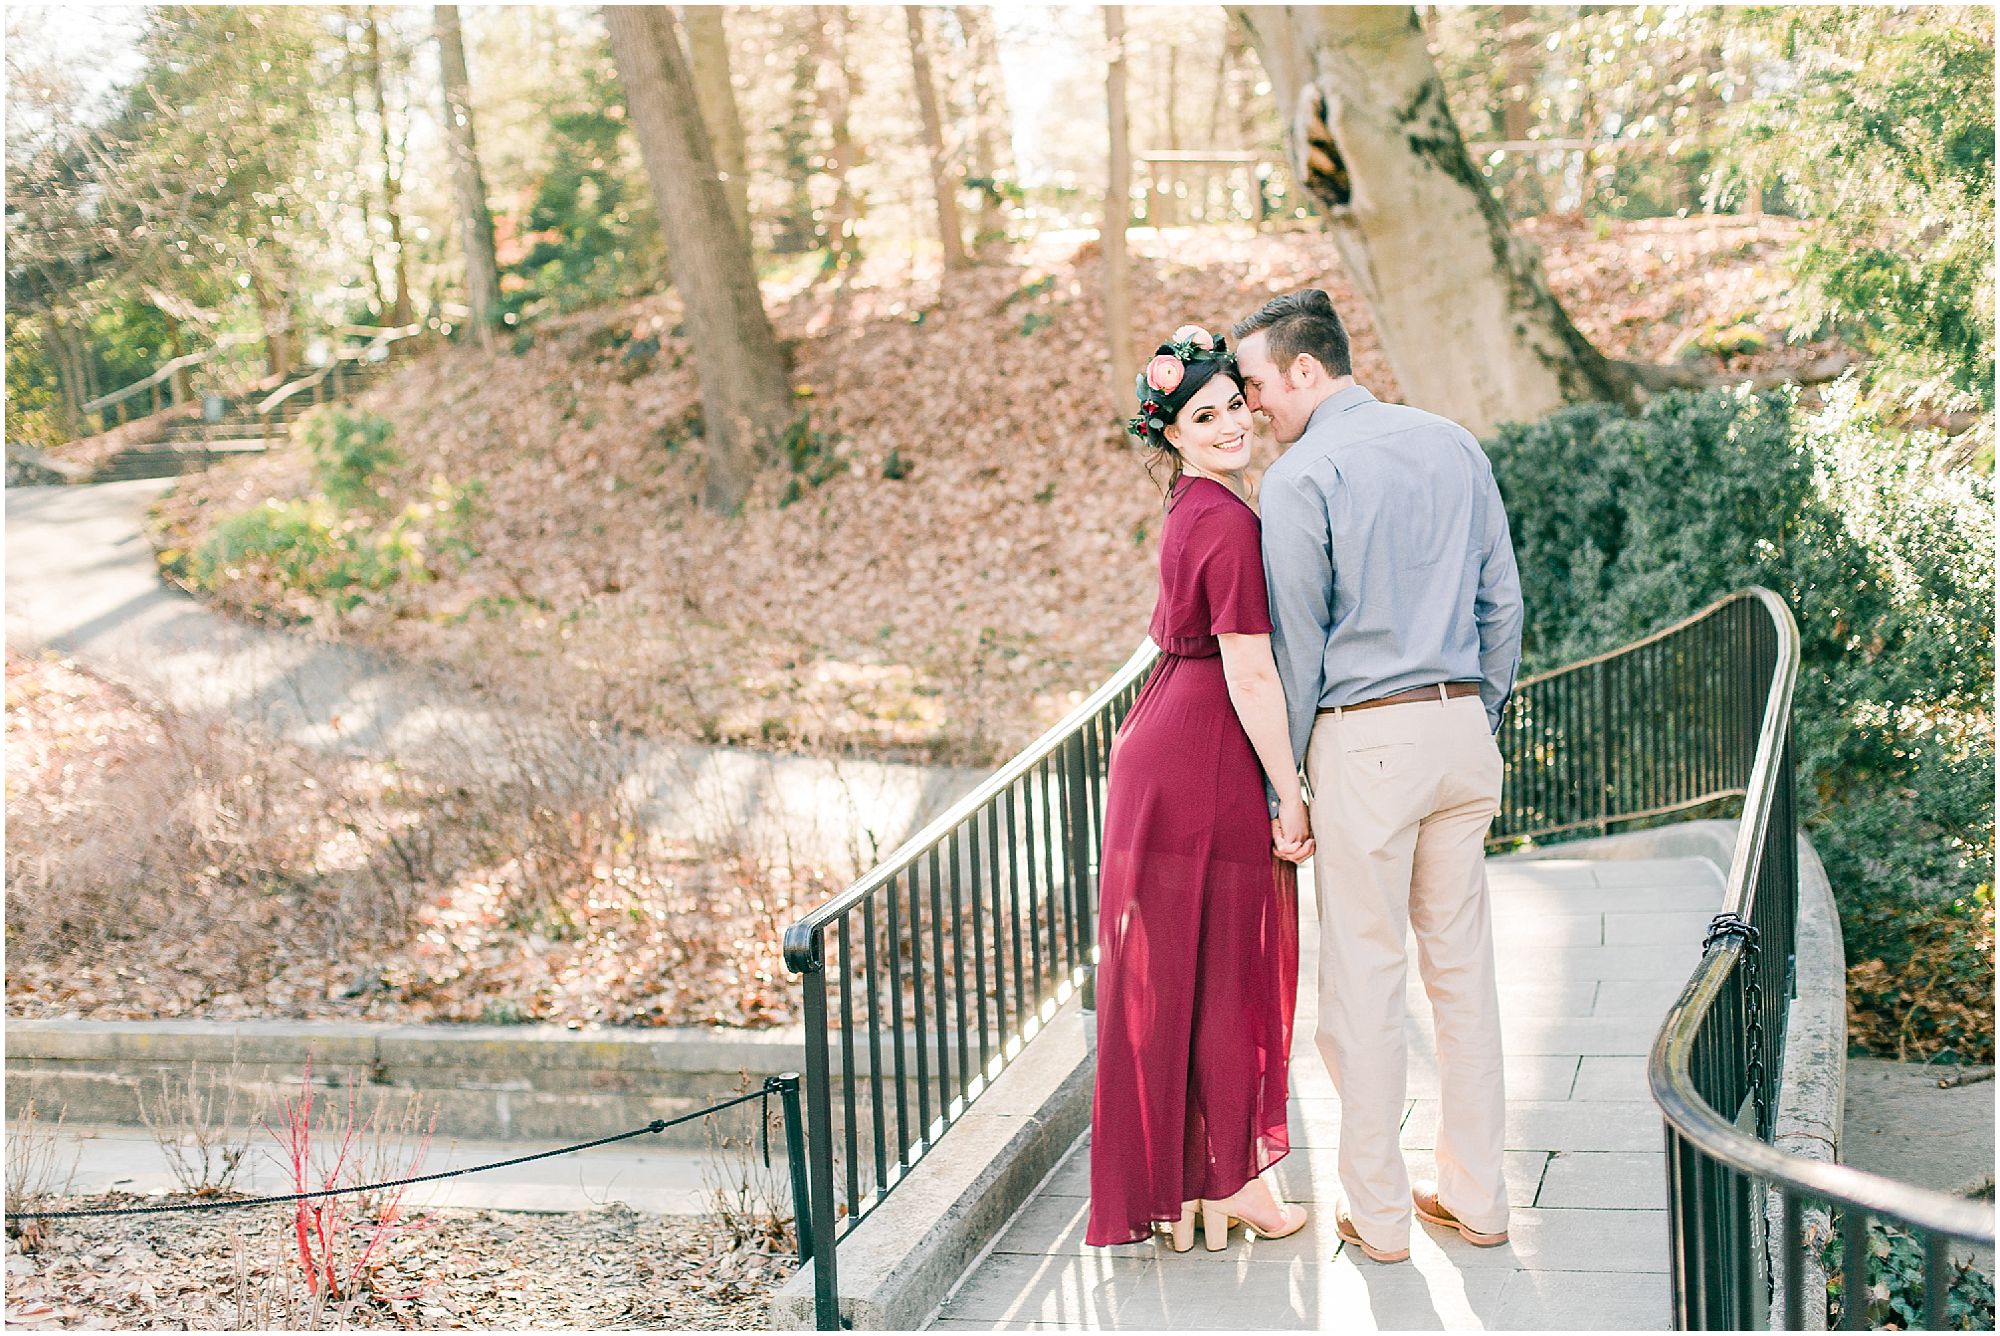 A Magical Boho Engagement Session at Longwood Gardens in Kennett Square, PA